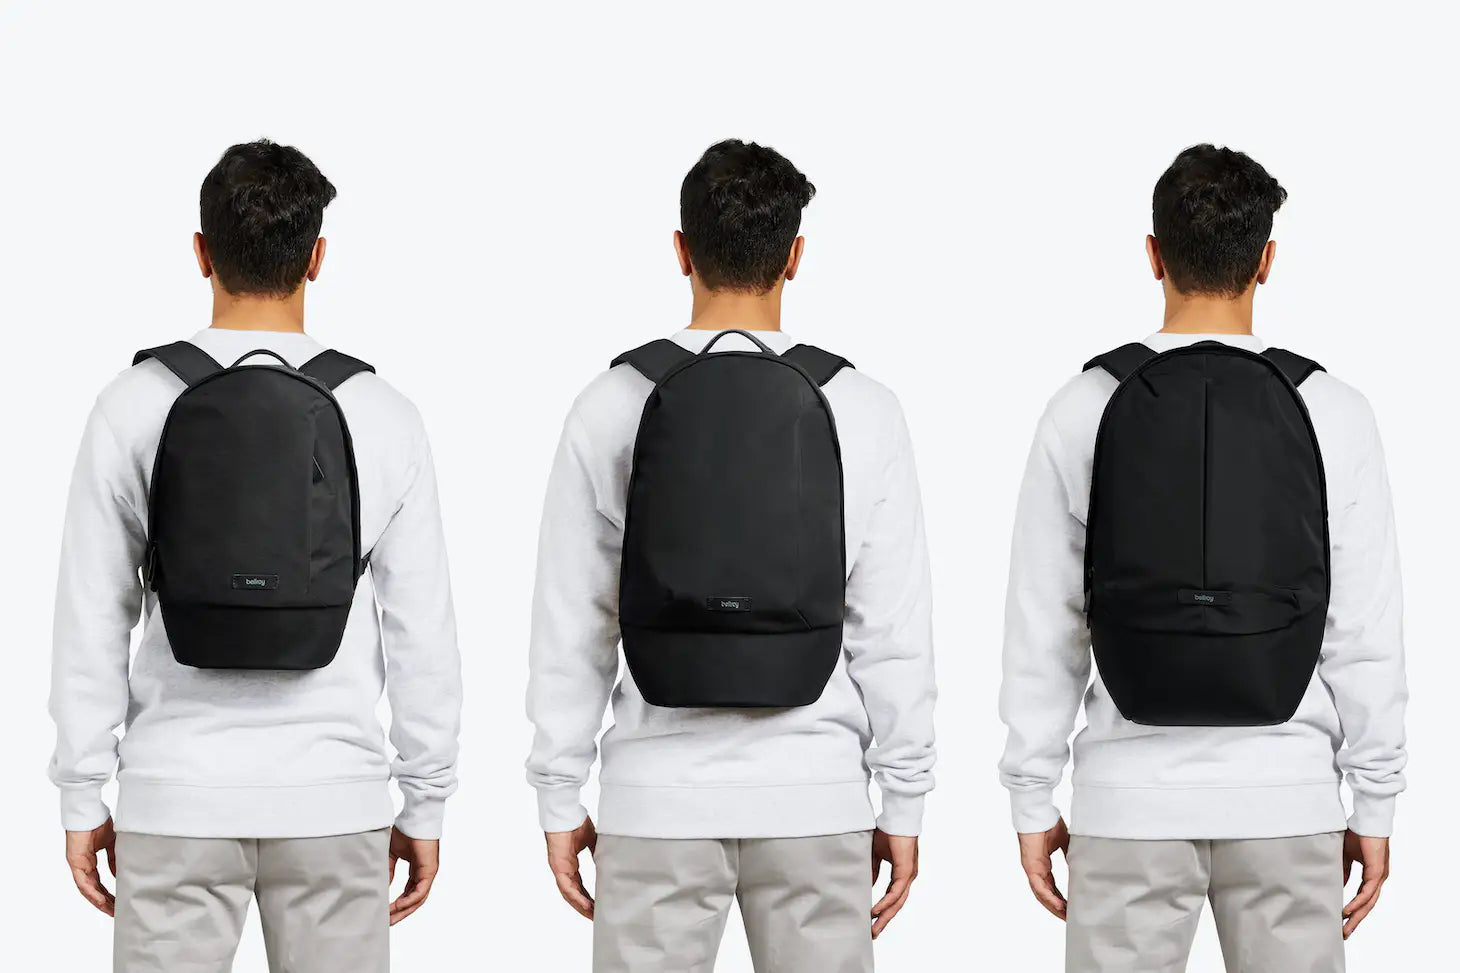 Classic Backpack 3 Sizes - The Everyday Laptop Backpack